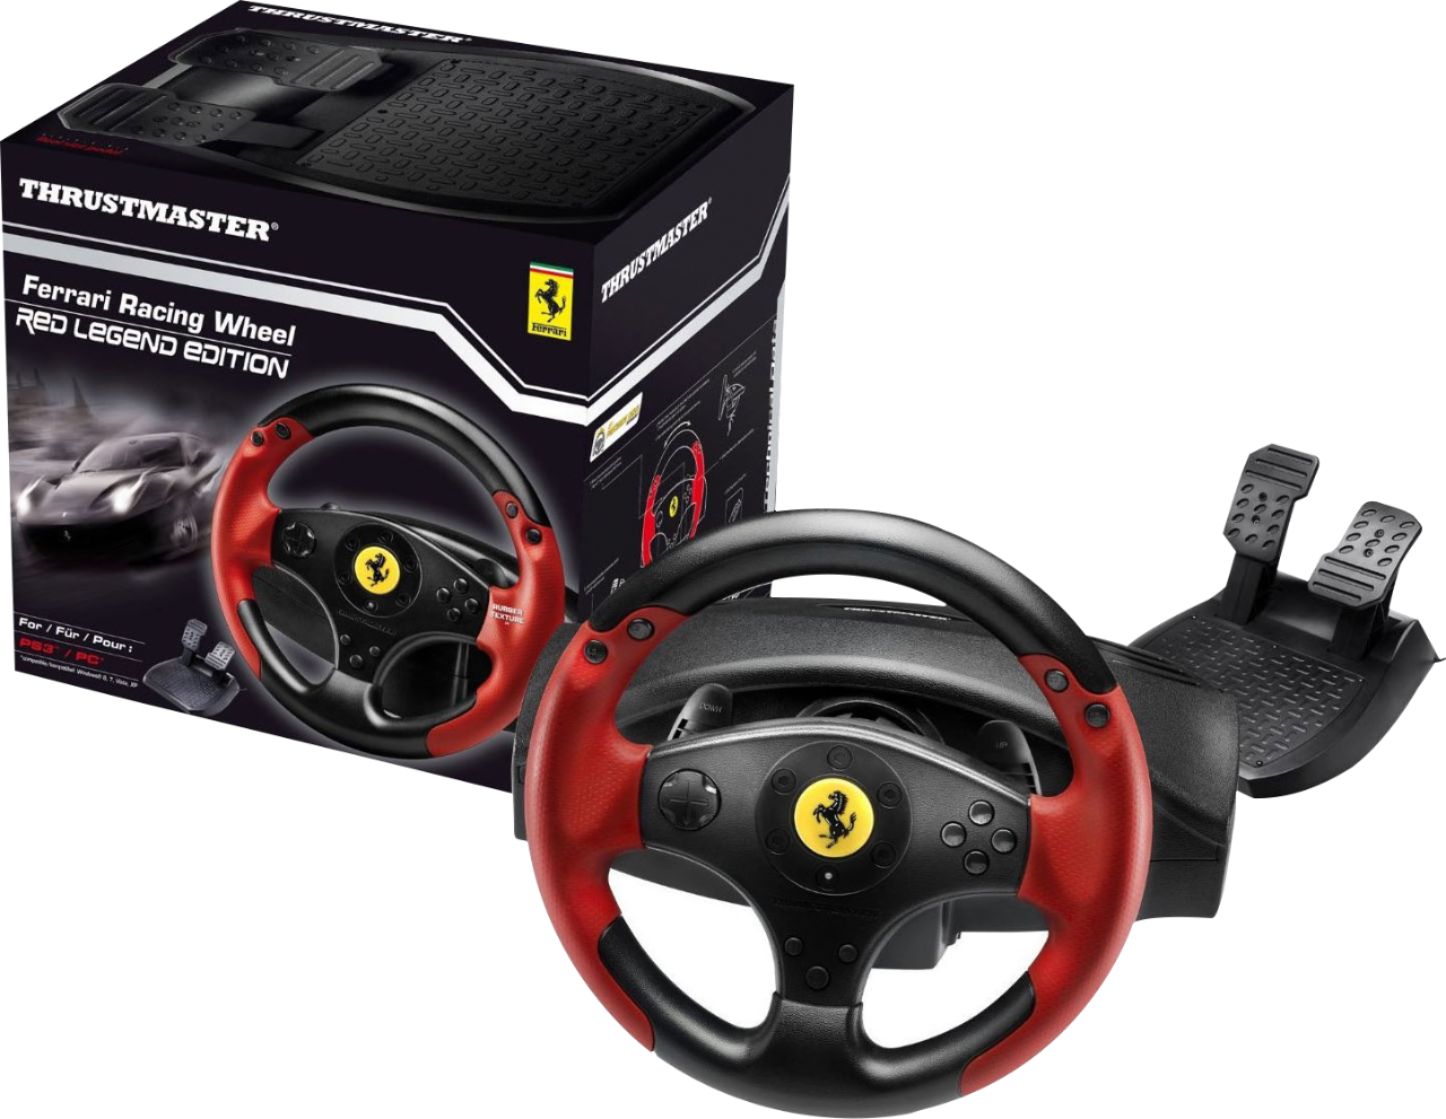 Best Buy: Thrustmaster Ferrari Red Legend Edition Racing Wheel for PC Sony PlayStation 3 Red 4060052